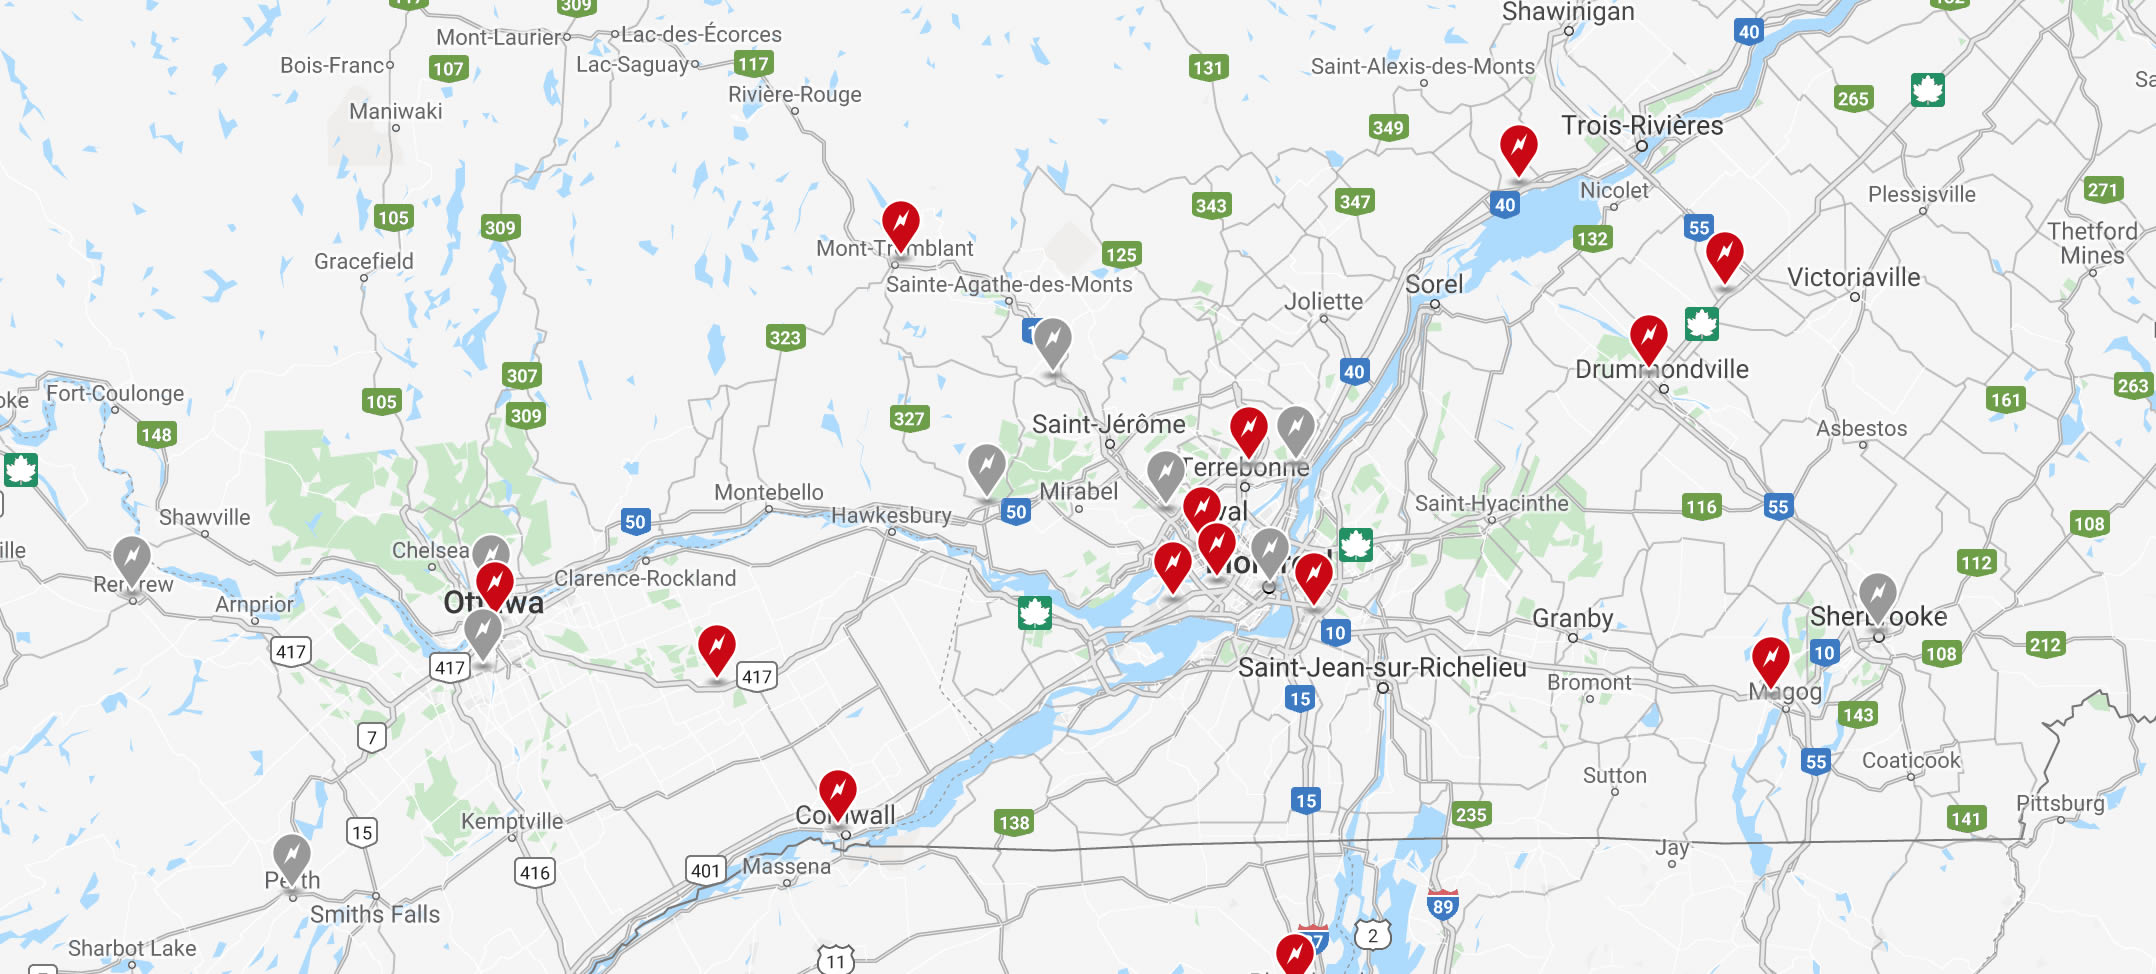 Tesla Charging Stations in Canada - Montreal